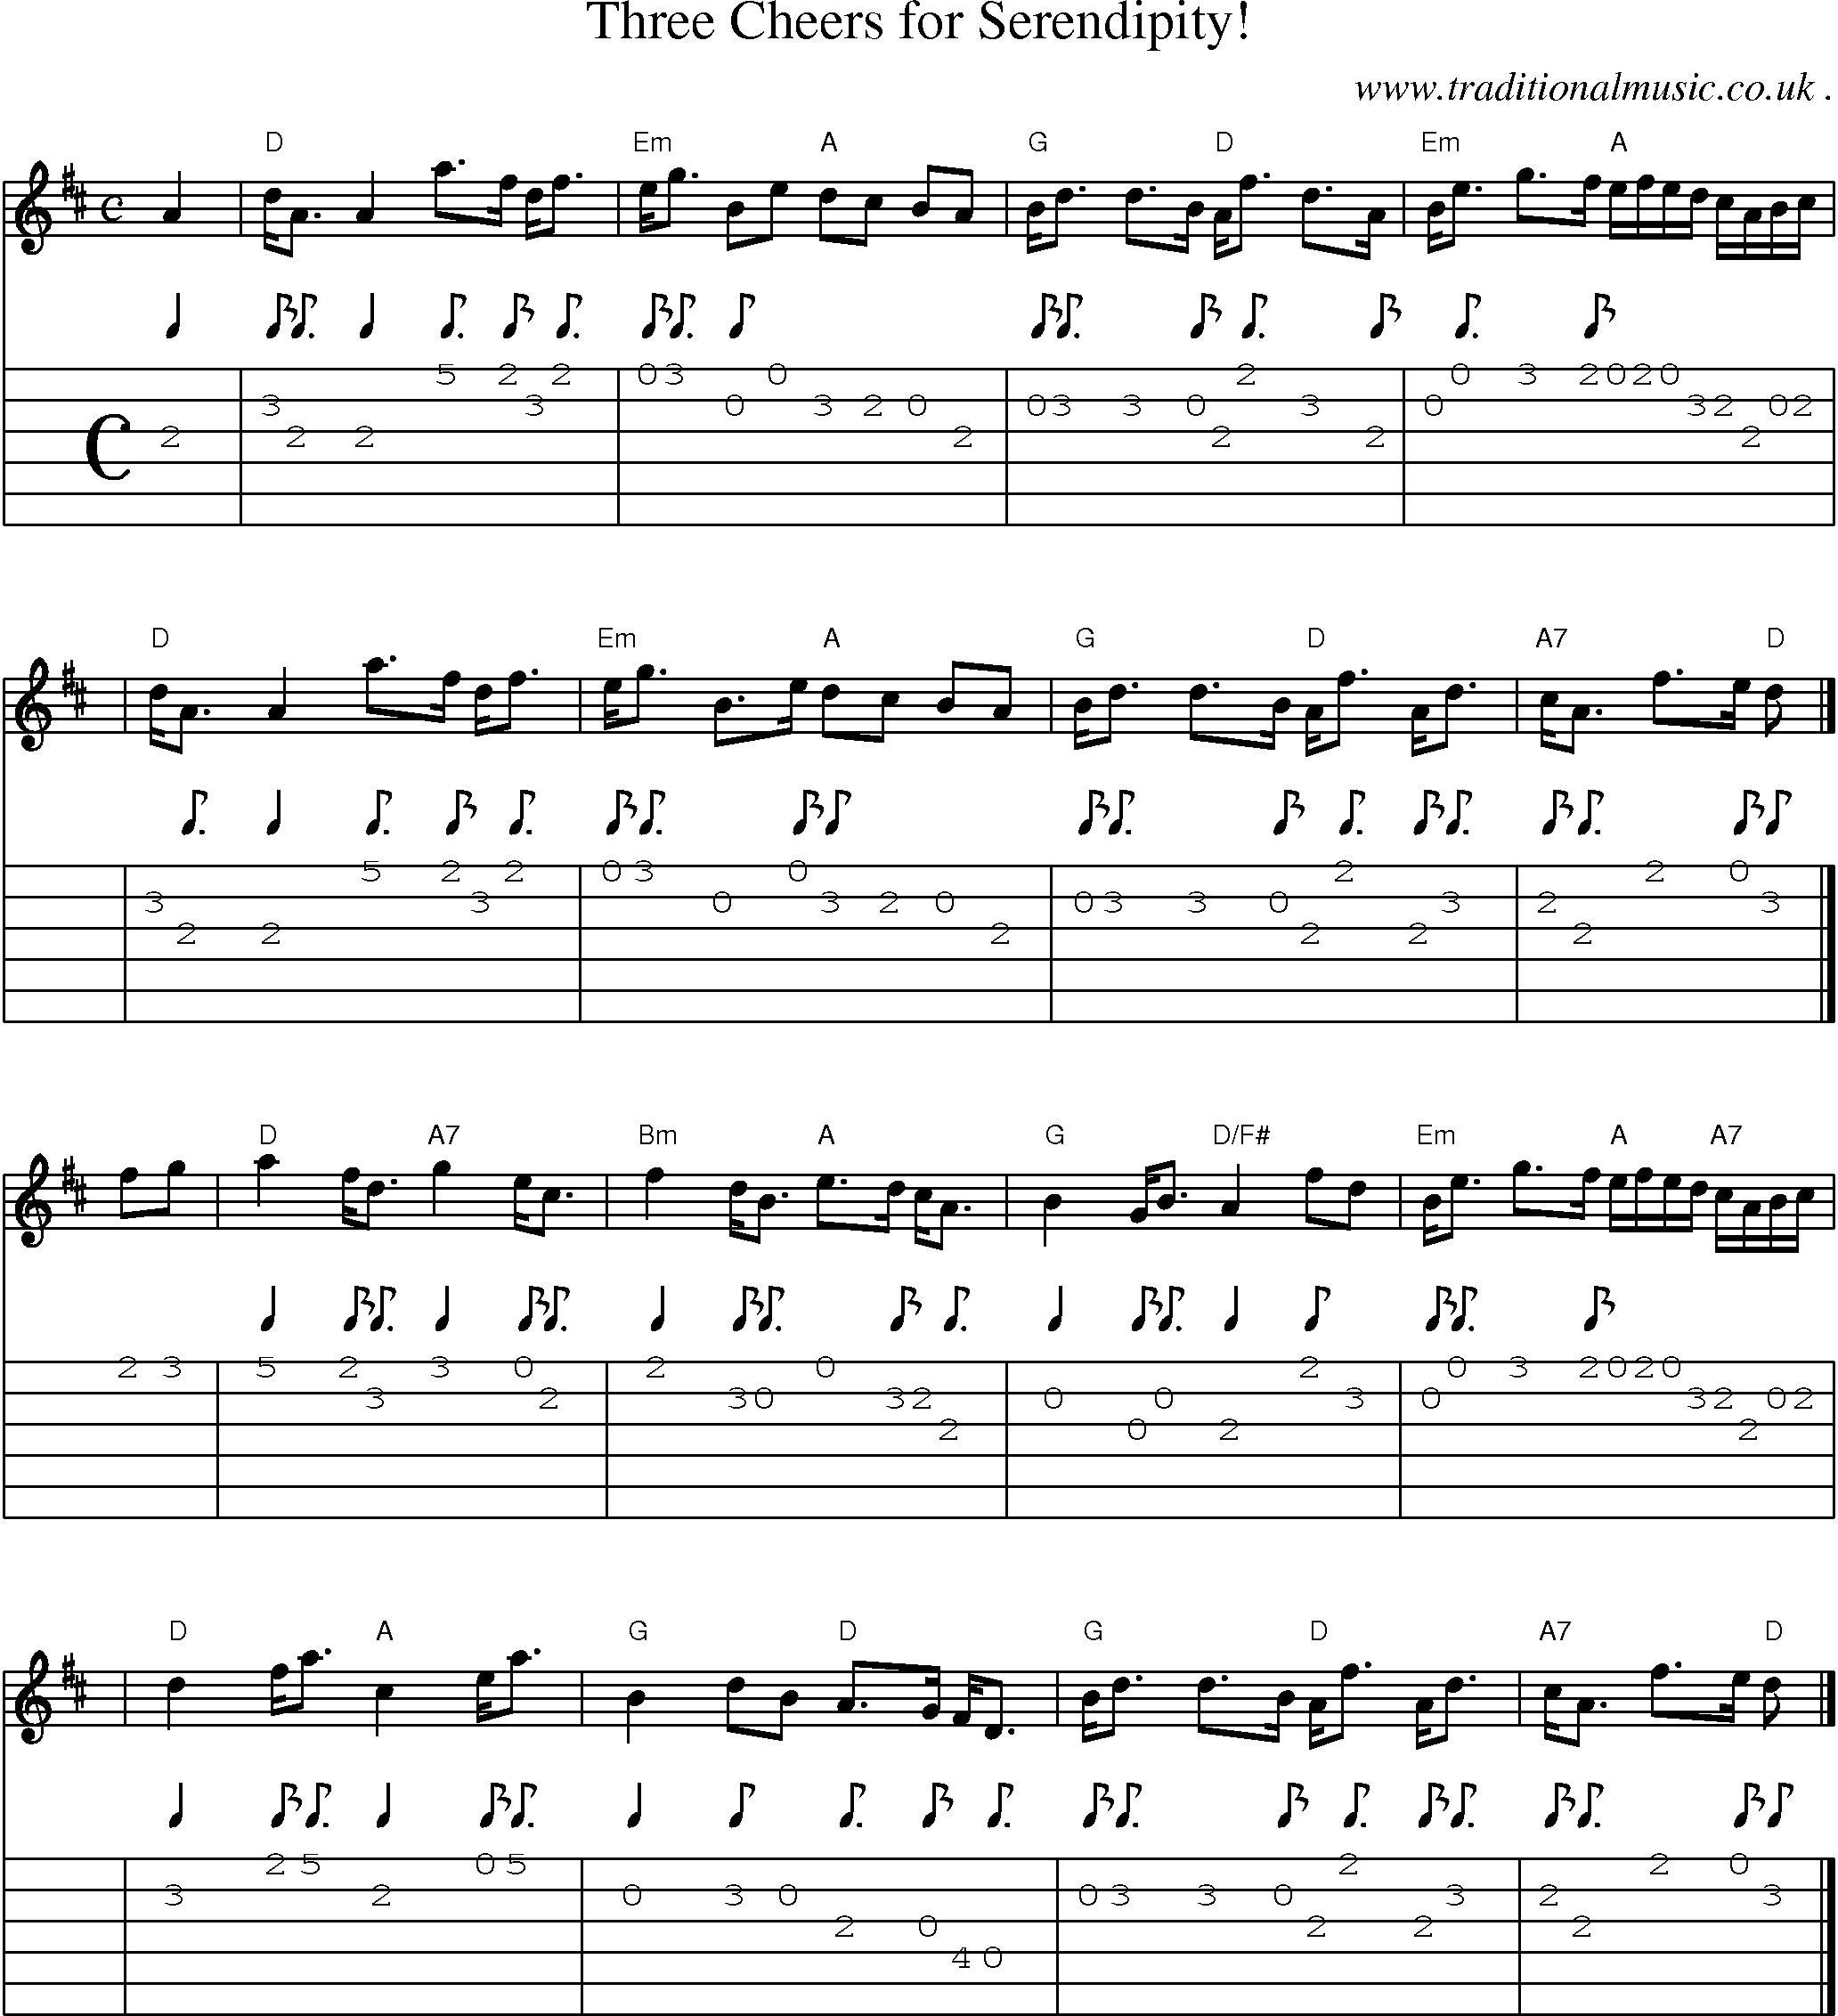 Sheet-music  score, Chords and Guitar Tabs for Three Cheers For Serendipity!